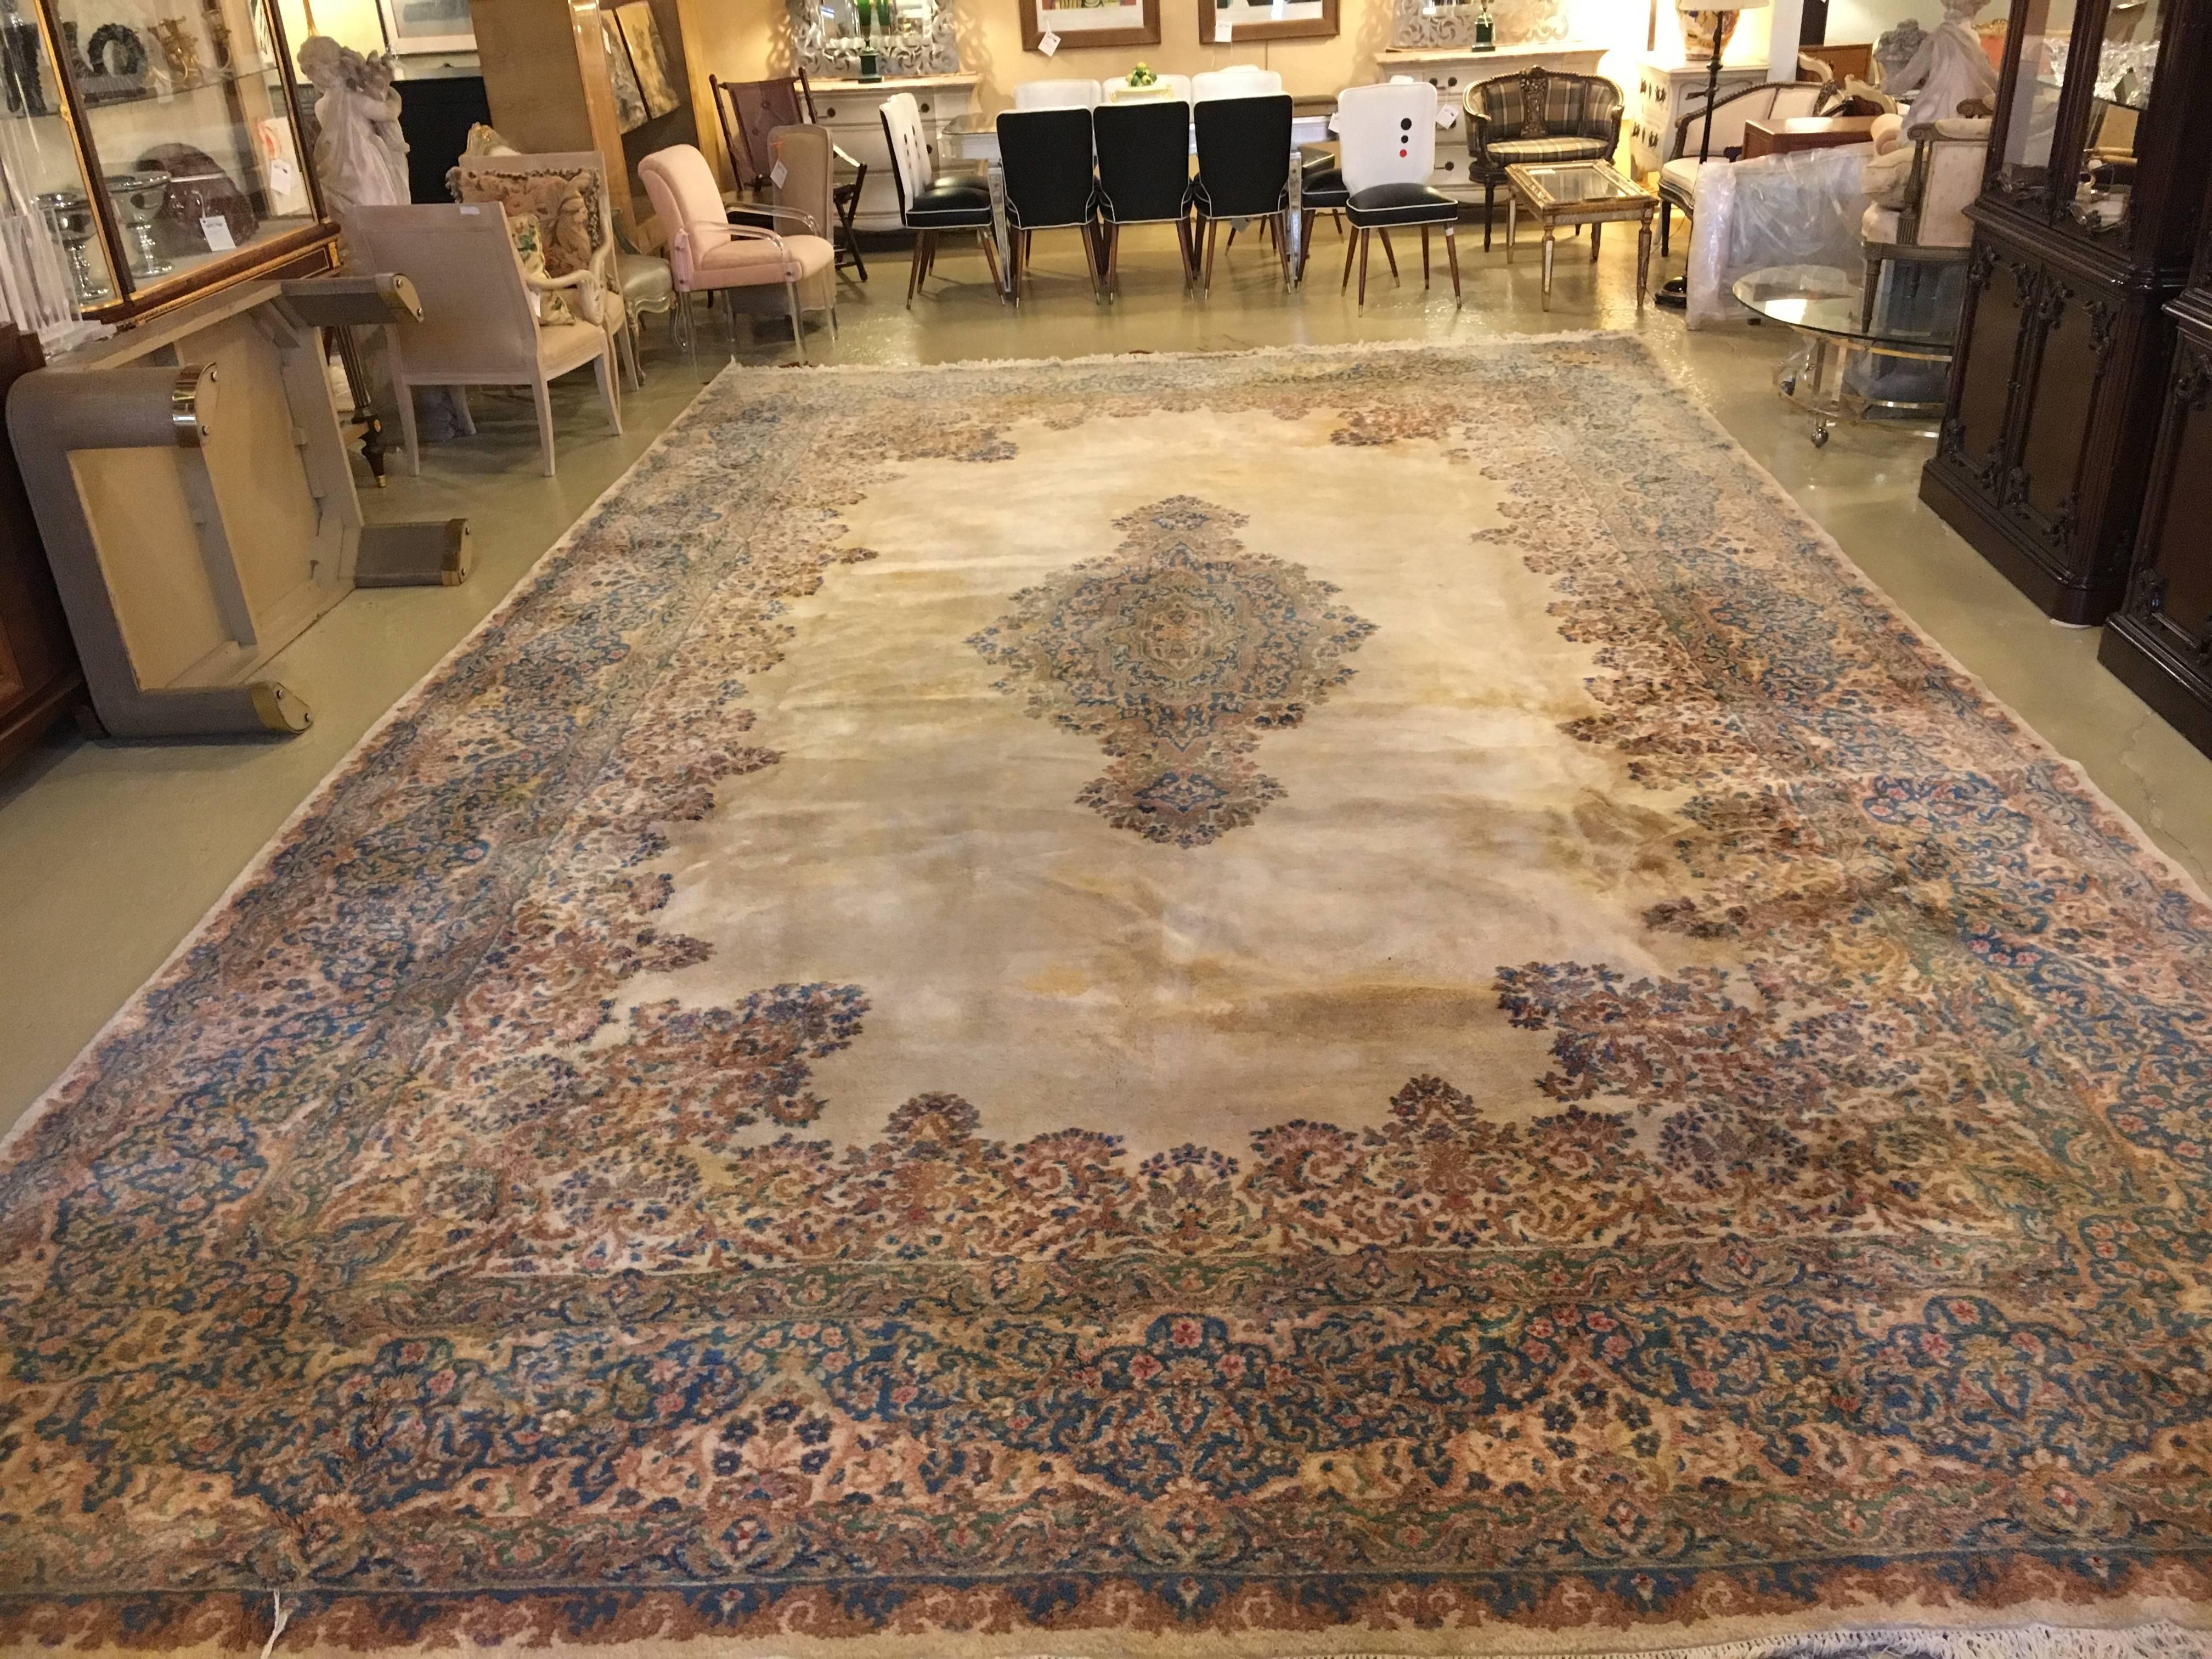 This open field Kirman carpet has vibrant and colorful borders as well as a vibrant and colorful center medallion. The rich thick border with celeste blu and rust tones having brown, orange and different beige tones. The center medallion matching